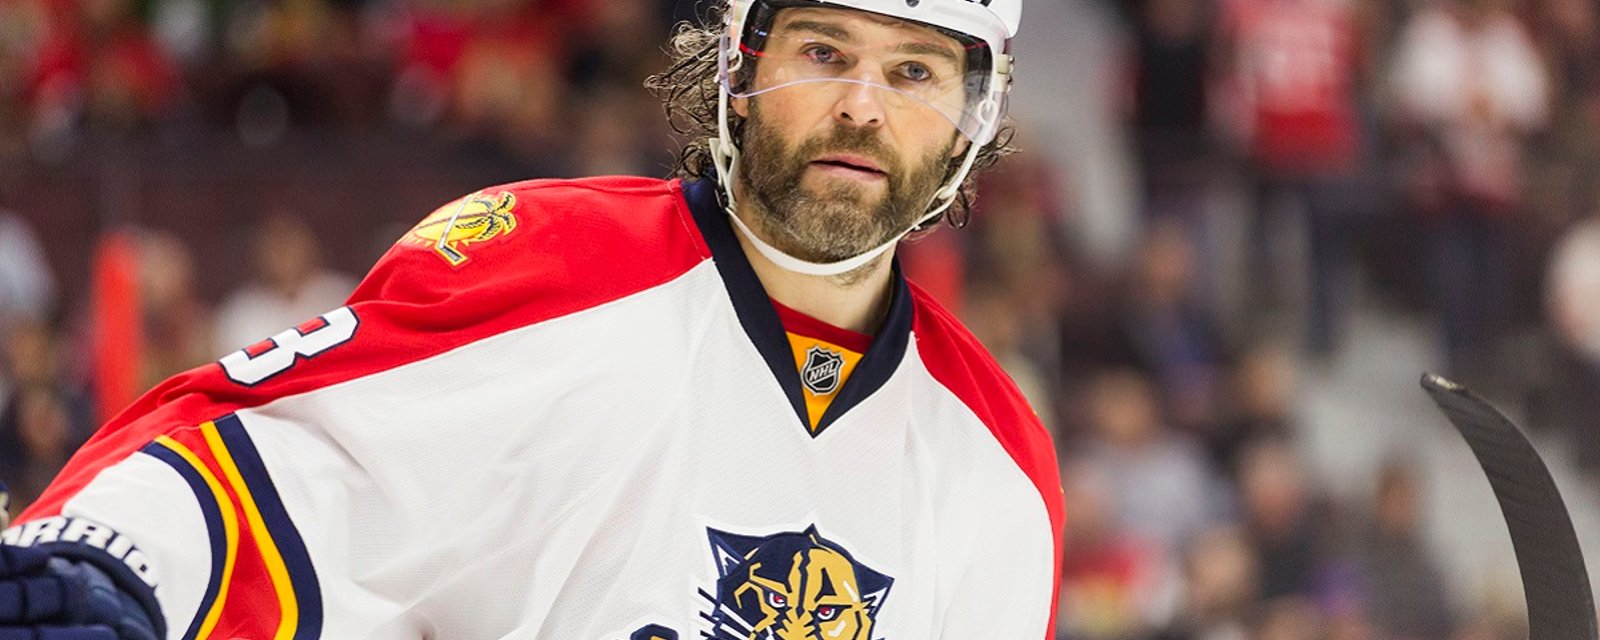 Breaking: Big update on Jaromir Jagr directly from his agent!